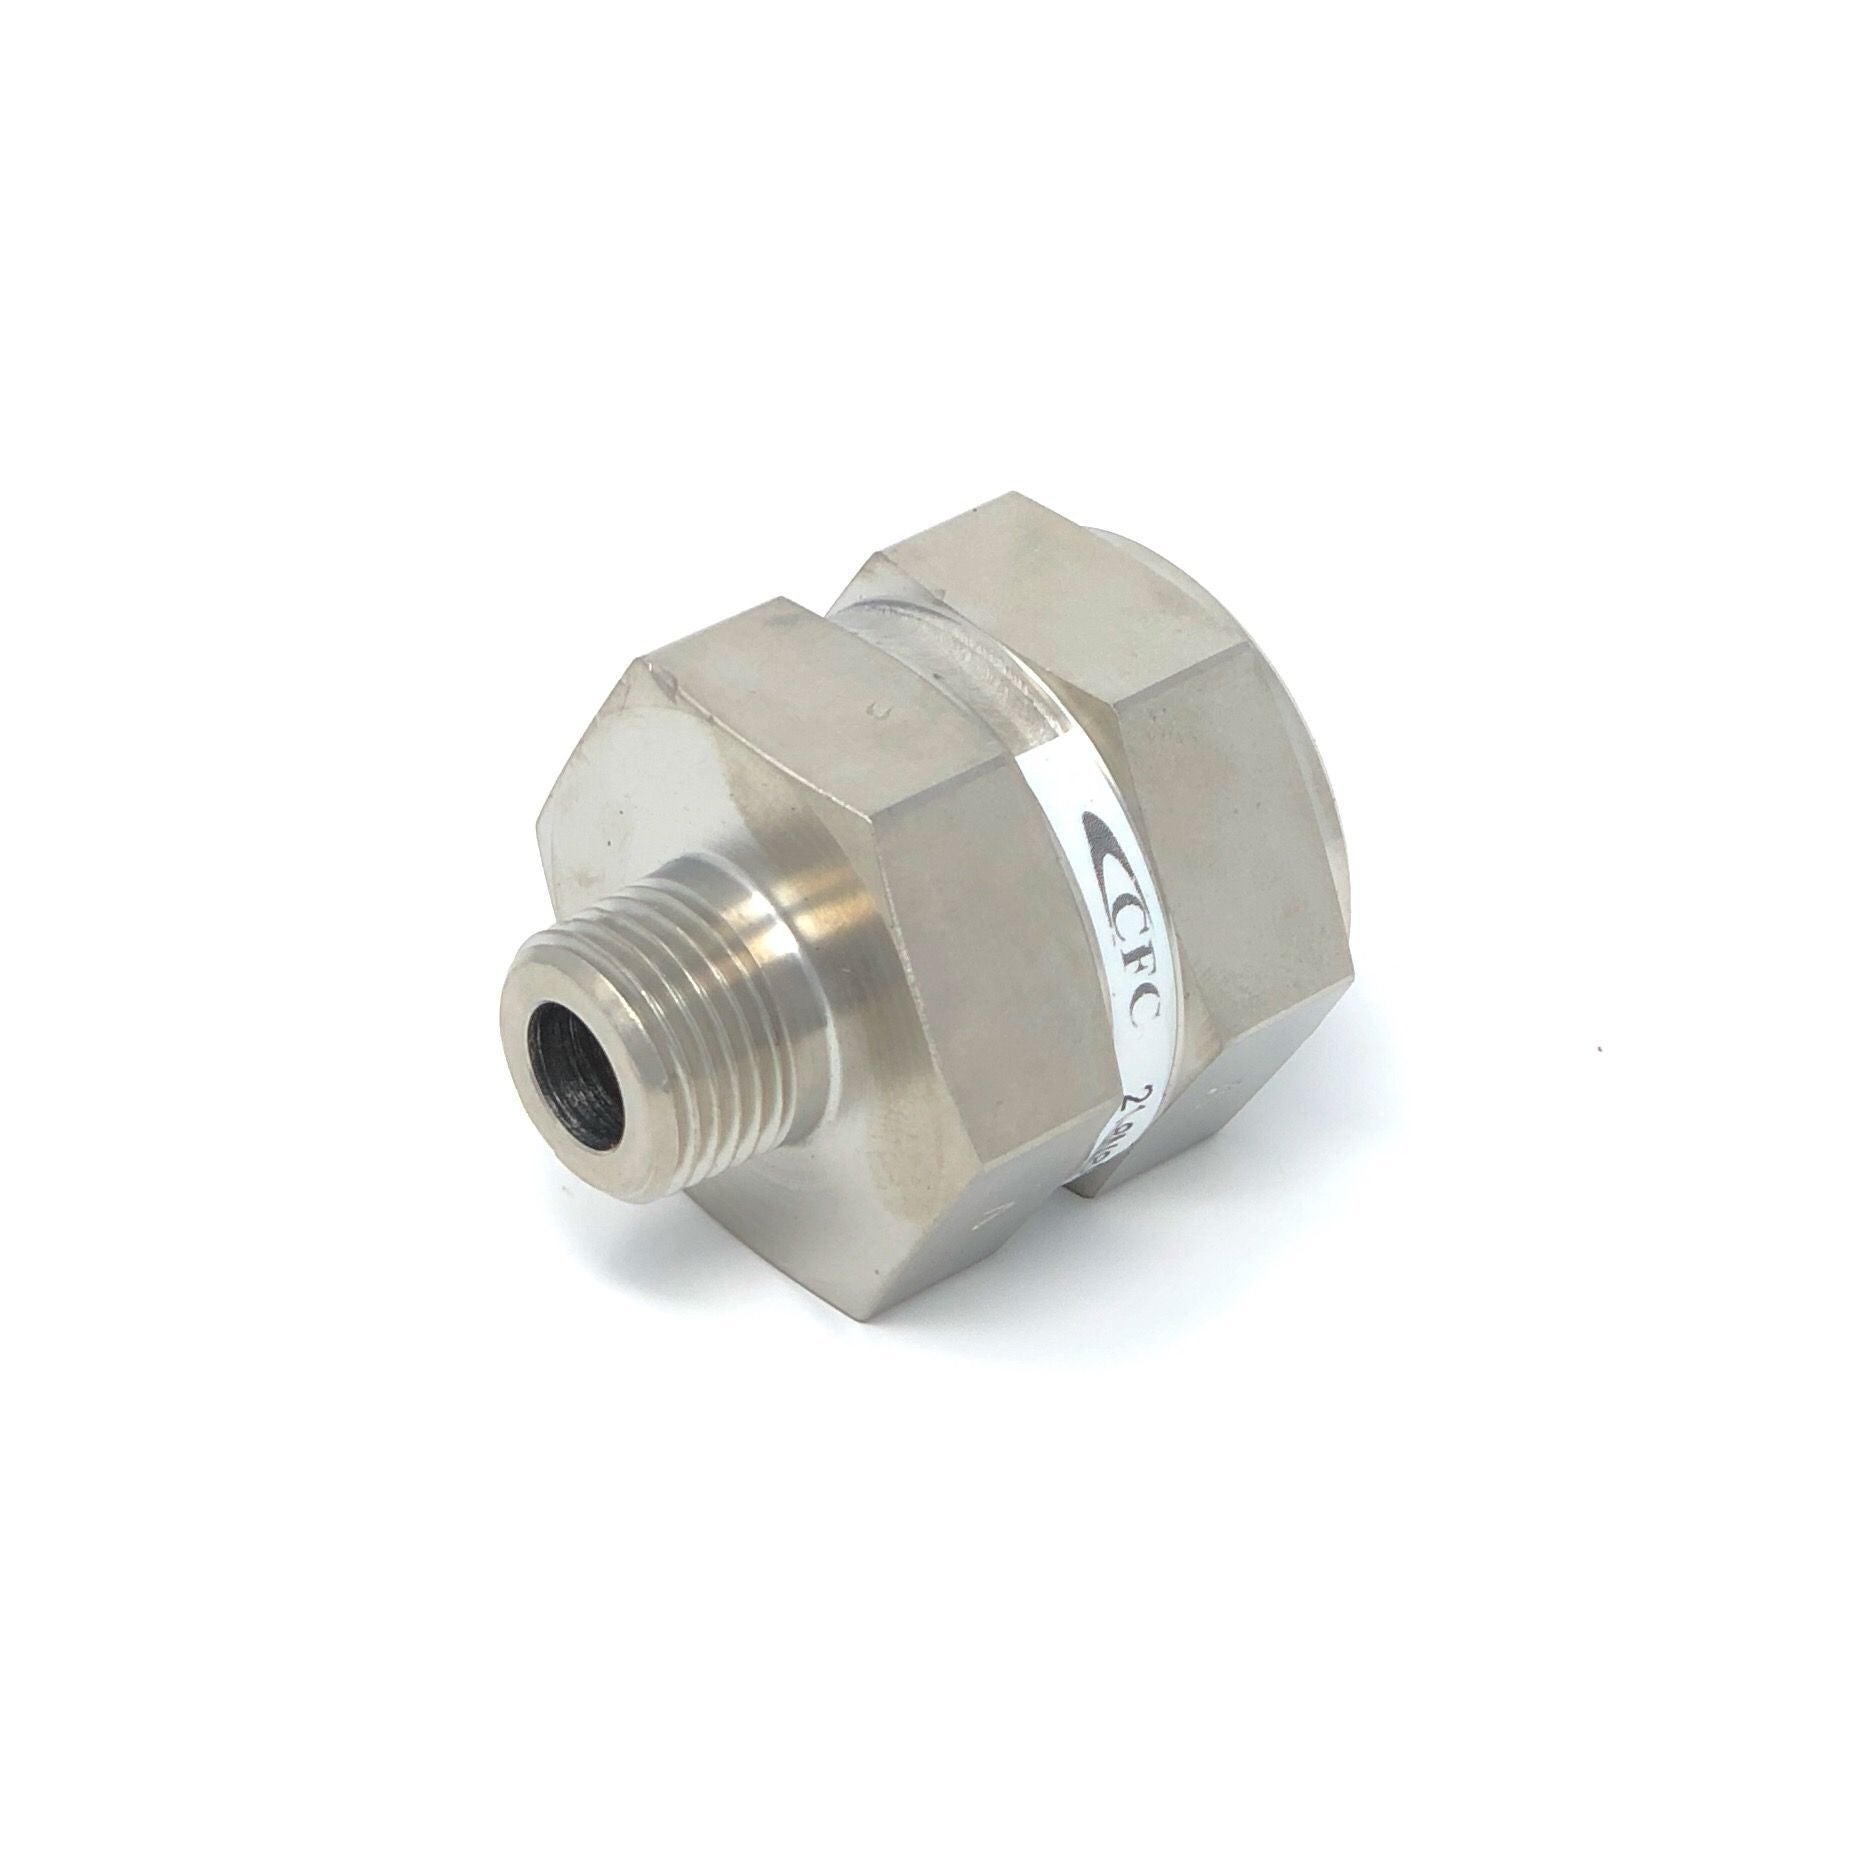 21-6M6M-18S : Chase High Pressure Inline Filter, 6000psi, #6 SAE (3/8"), 18 Micron, No Visual Indicator, No Bypass